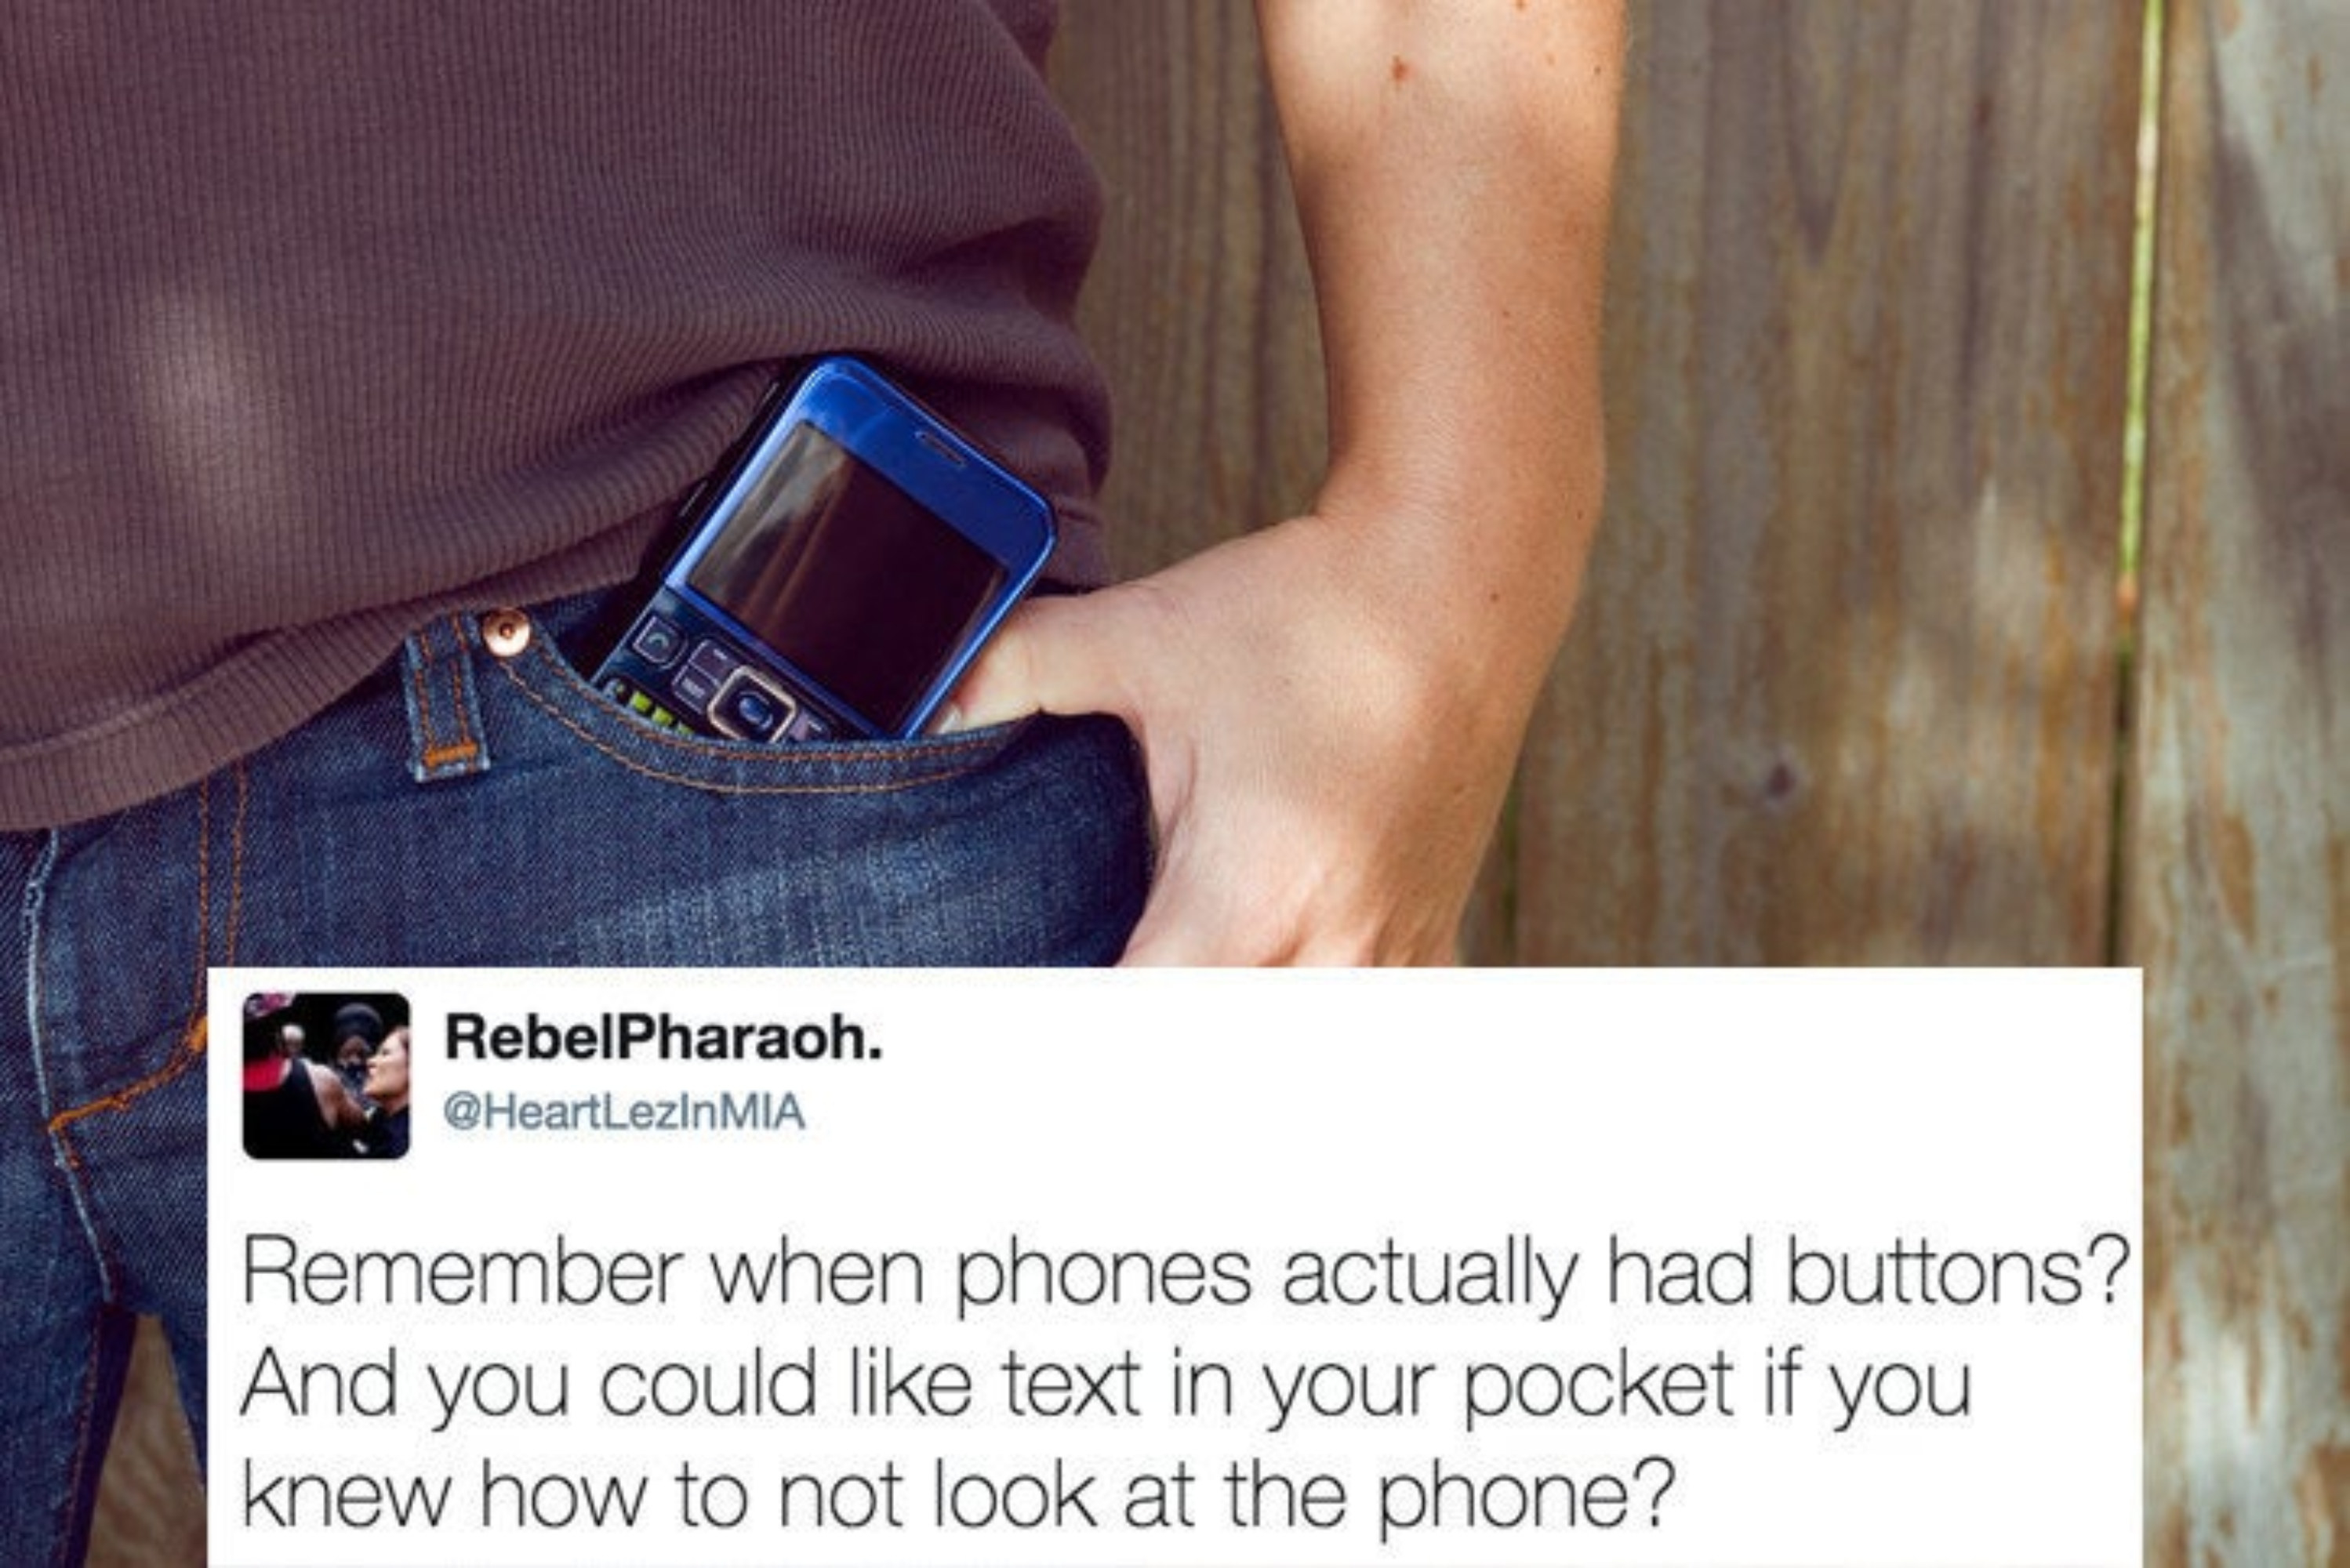 Person with cellphone on pocket